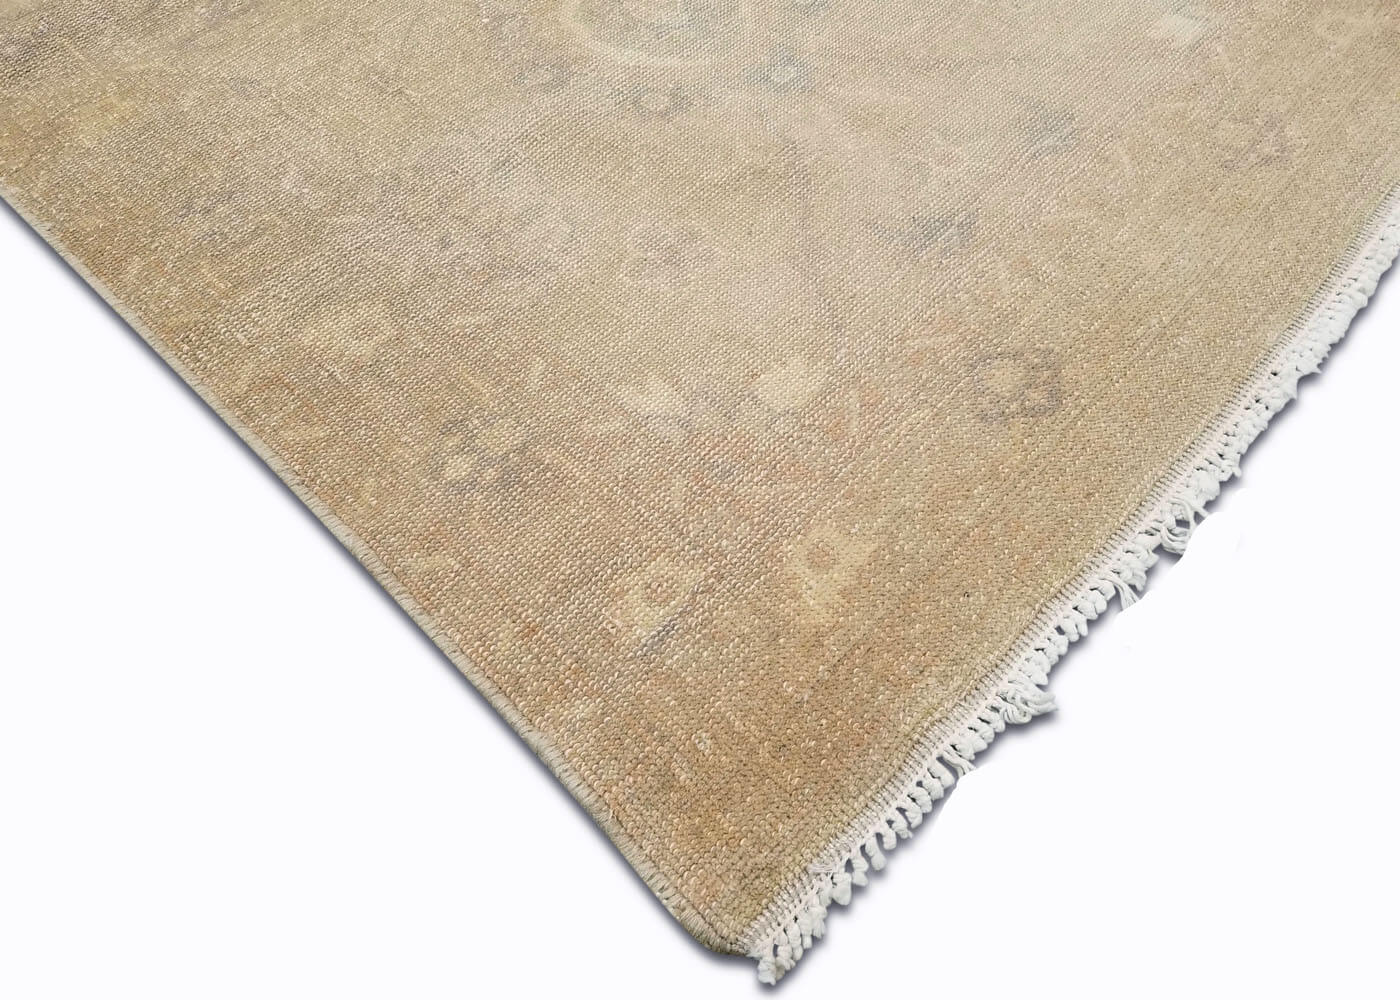 Vintage Egyptian Sultanabad Runner - 2'10" x 13'10"